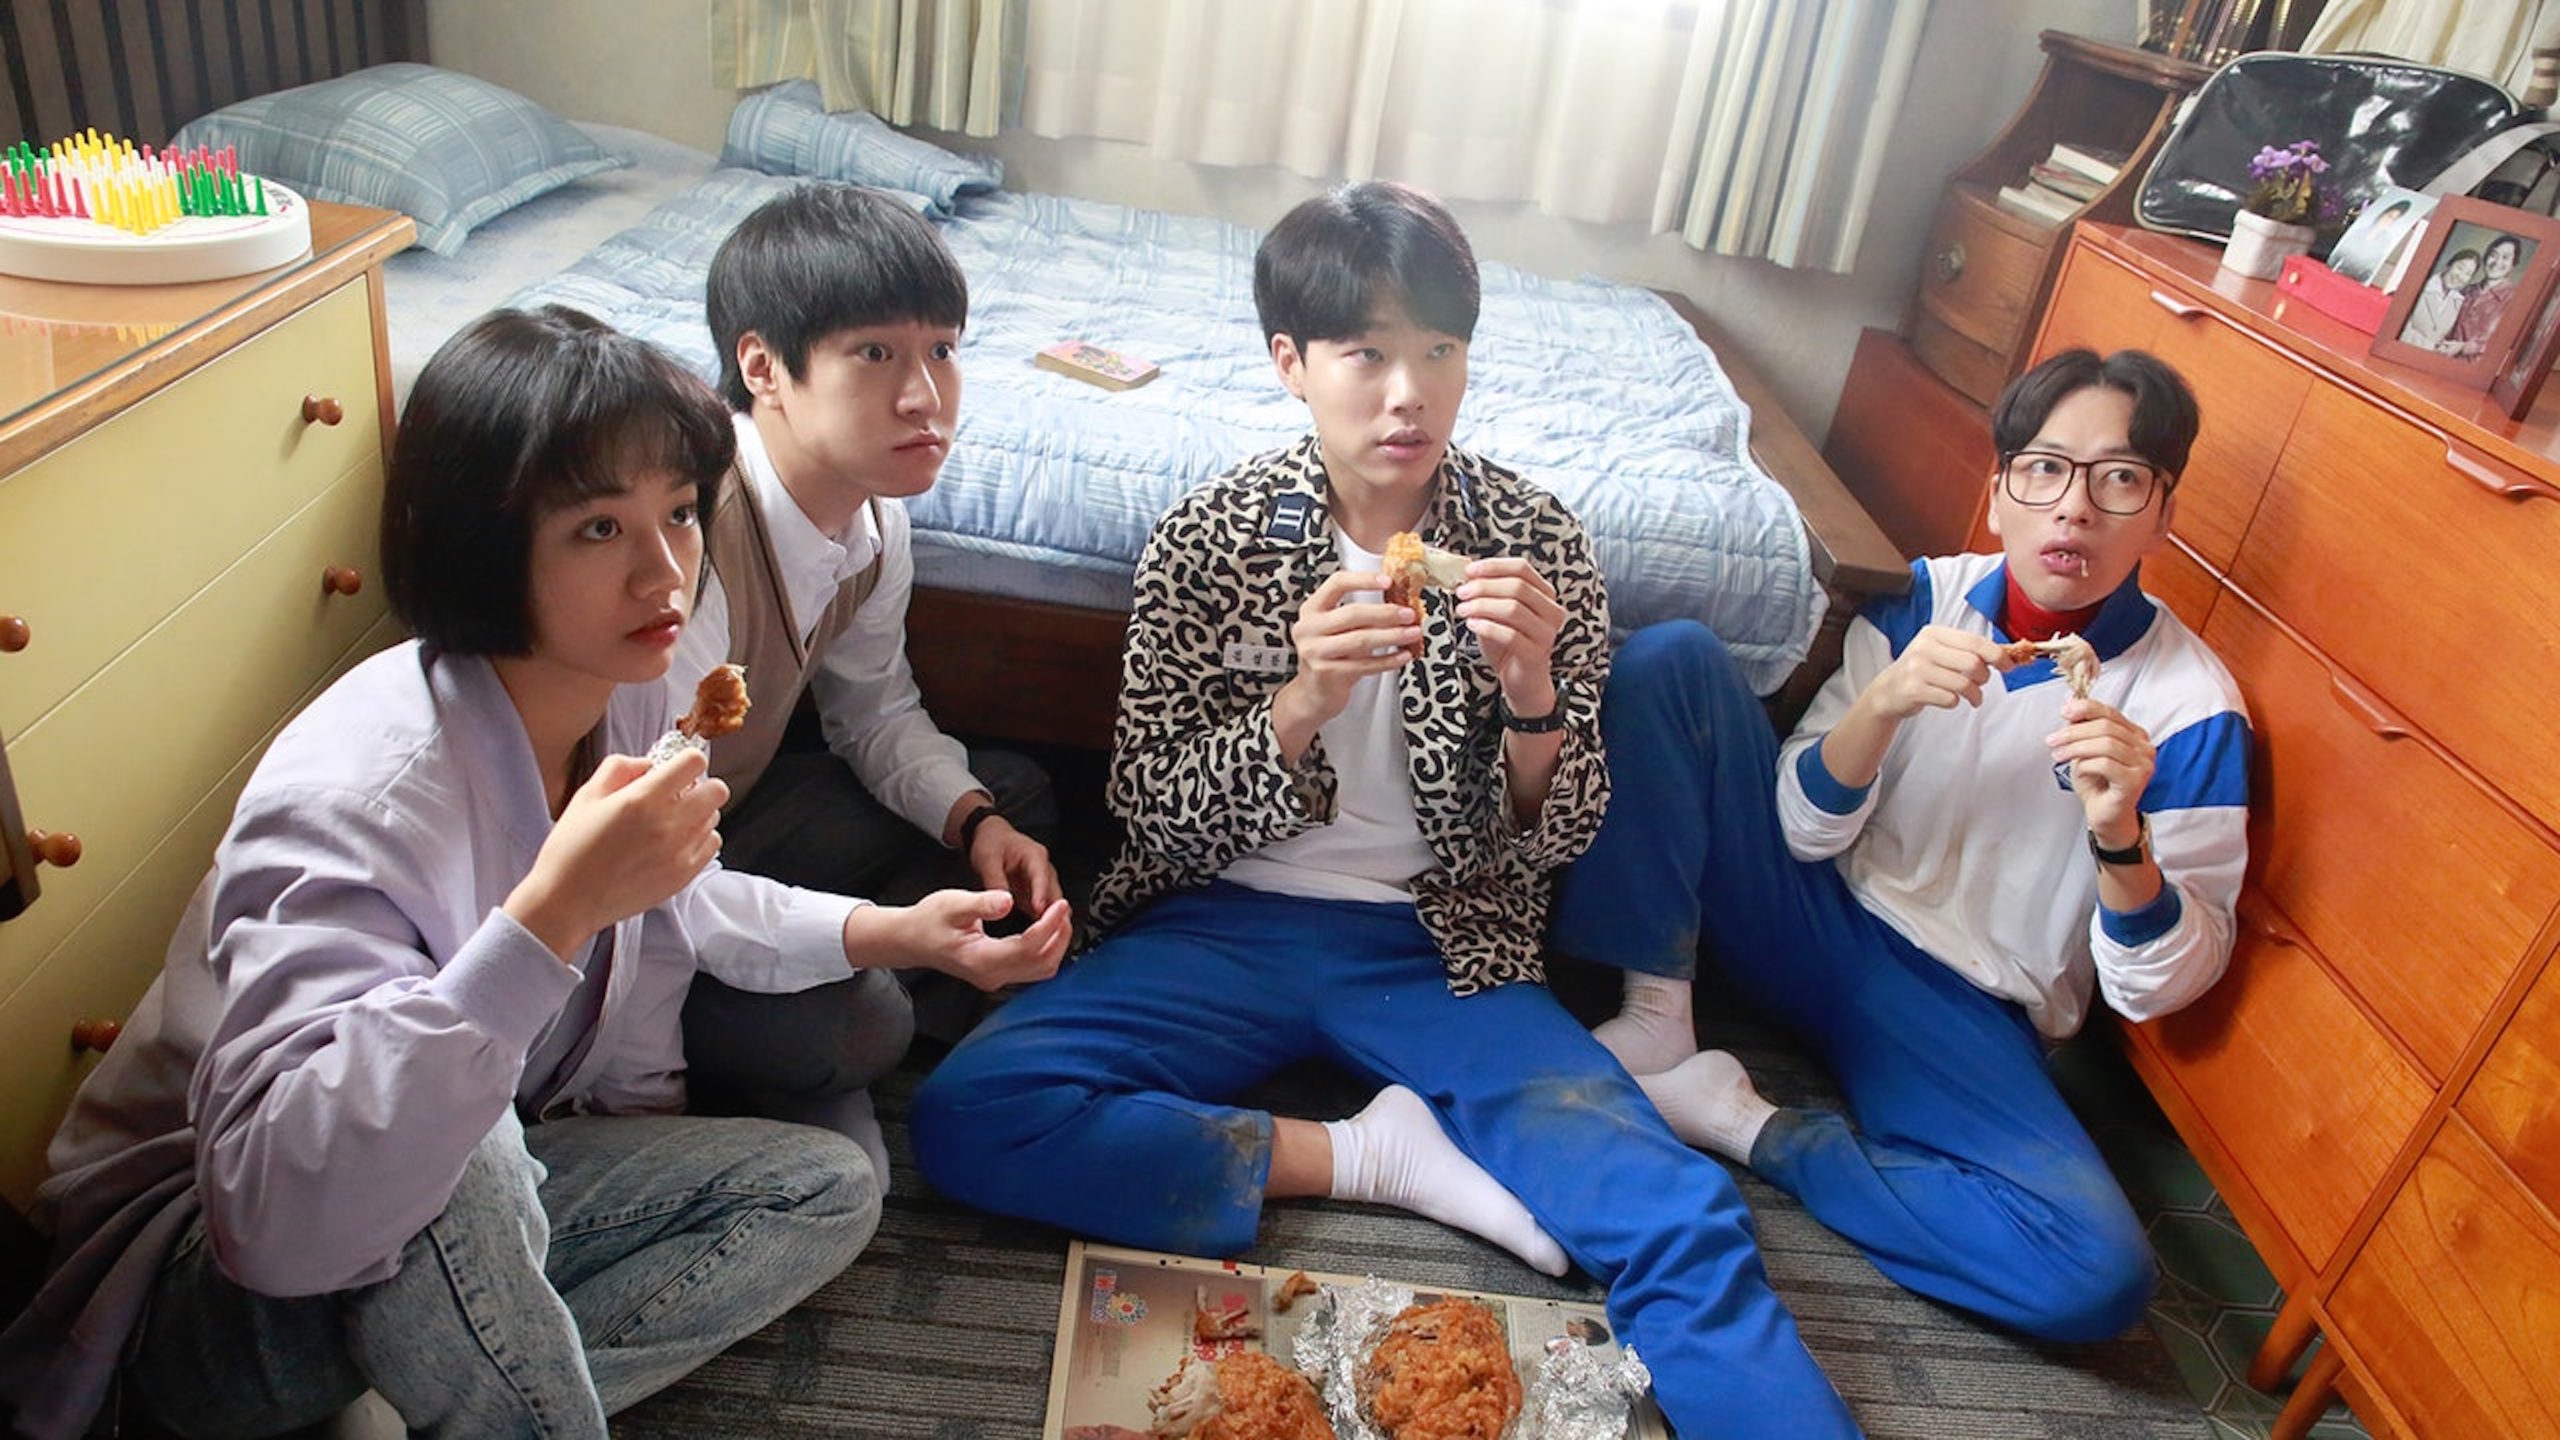 Four of the five friends from Reply 1988 sitting on the floor eating chicken